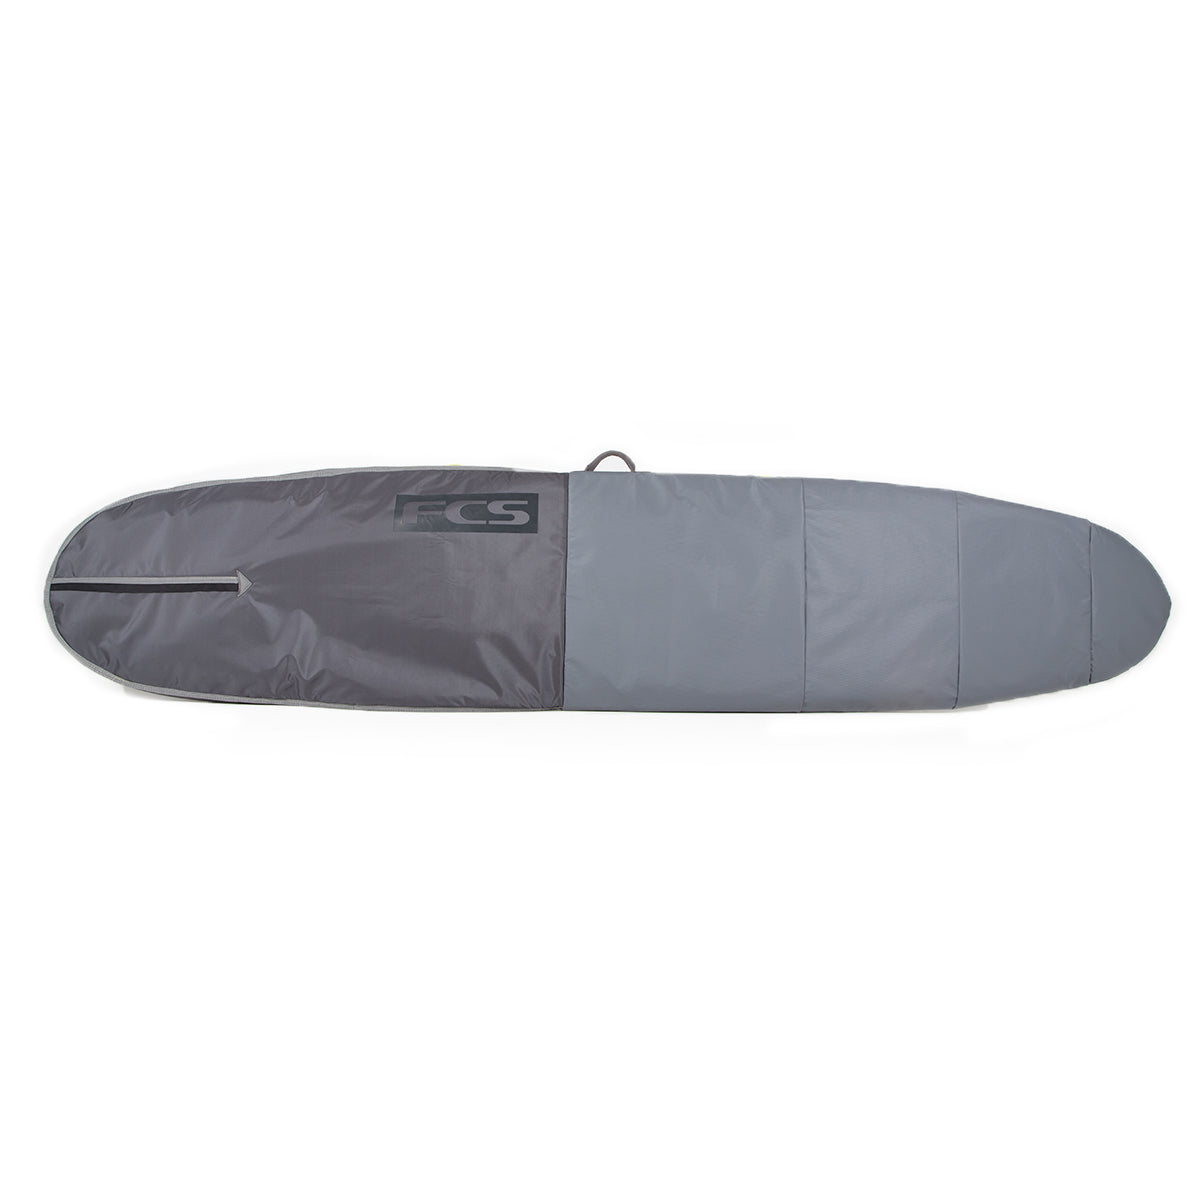 FCS Day Long Board Cover | 10'2 Cool Grey